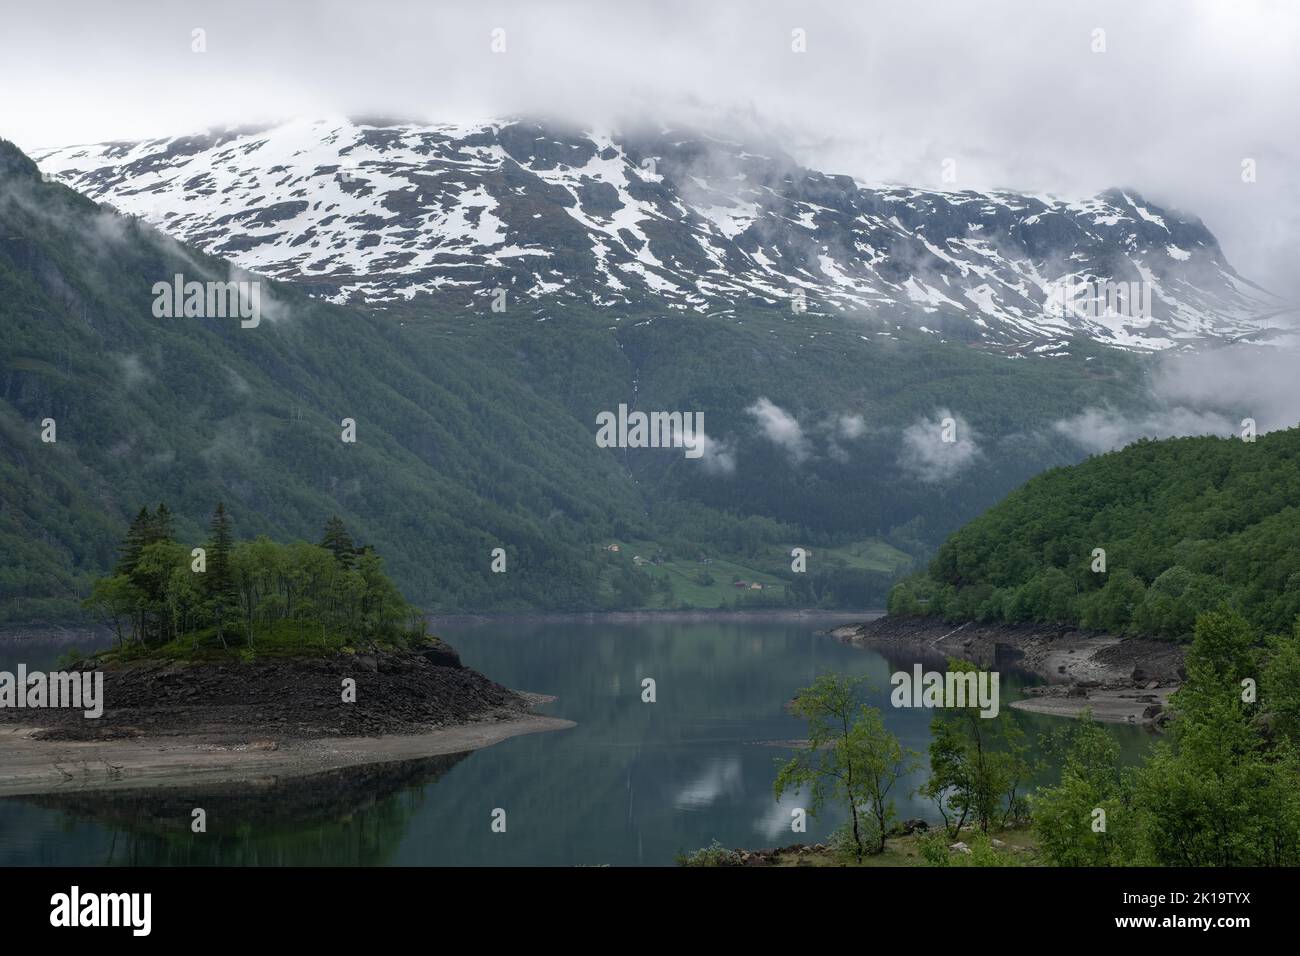 Wonderful landscapes in Norway. Vestland. Beautiful scenery of an island in the Roldalsvatnet lake. Snowed mountains and trees on rocks in background. Stock Photo